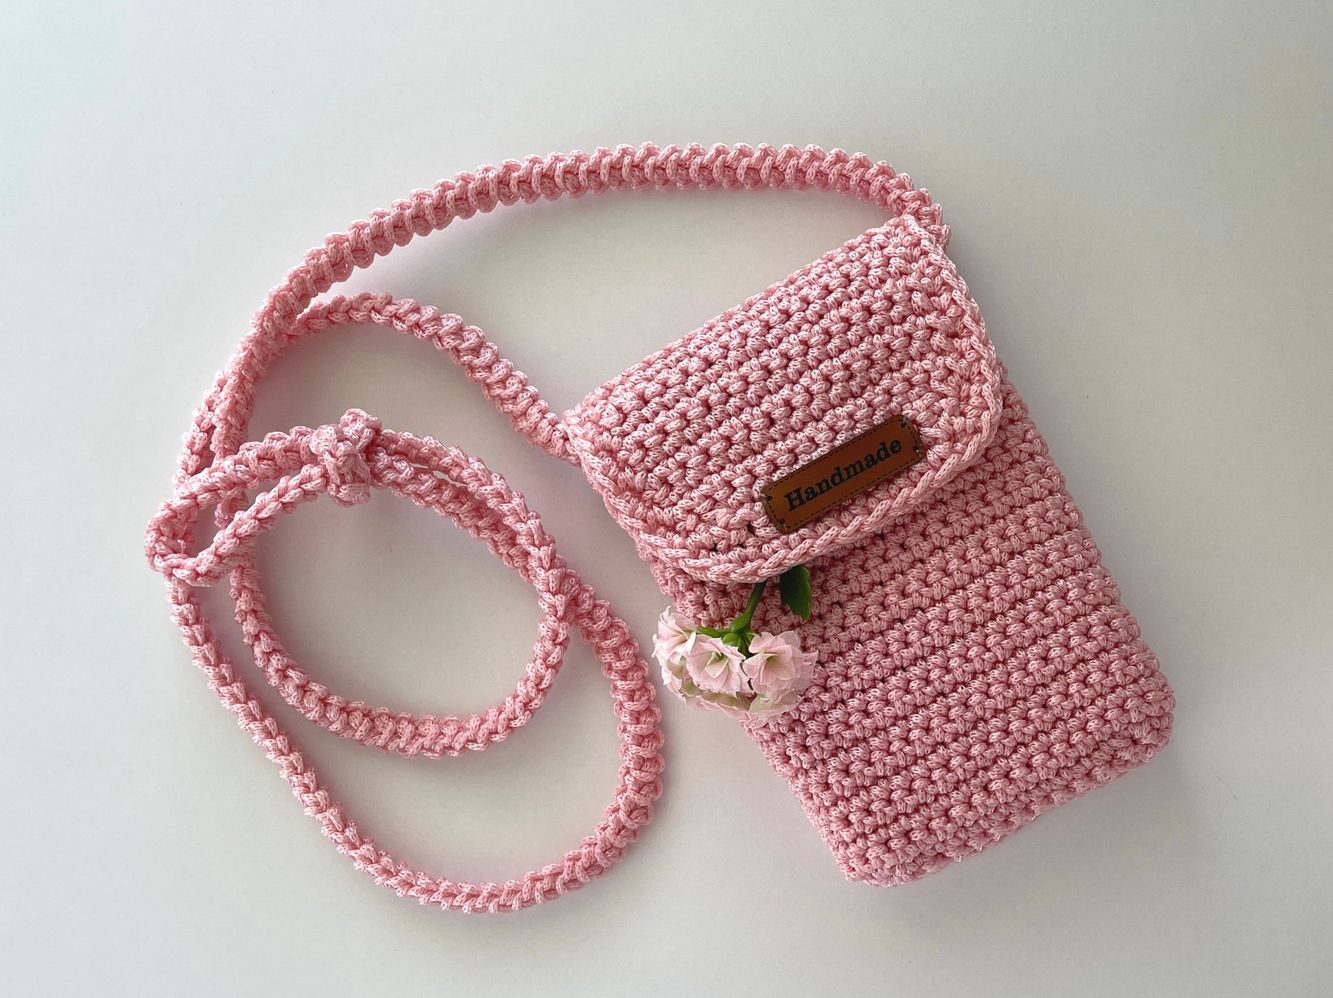 MABULA Handwoven Cotton Rope Crochet Crossbody Bag for Women Small Size  Female Phone Purse for Summer Beach Drawstring Pouch